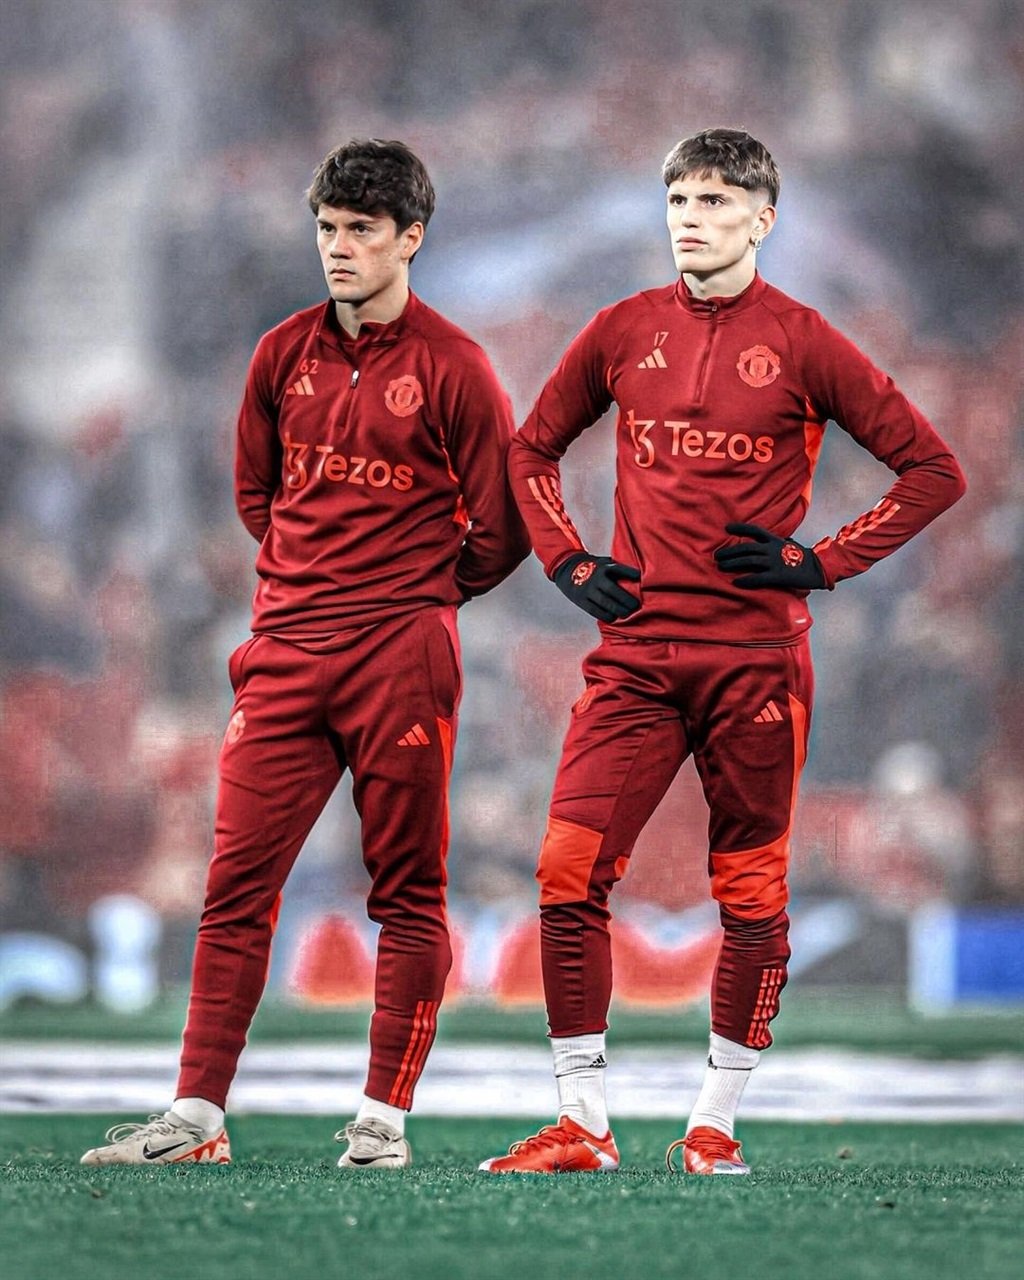 Manchester United youngsters Facundo Pellistri and Alejandro Garnacho. 